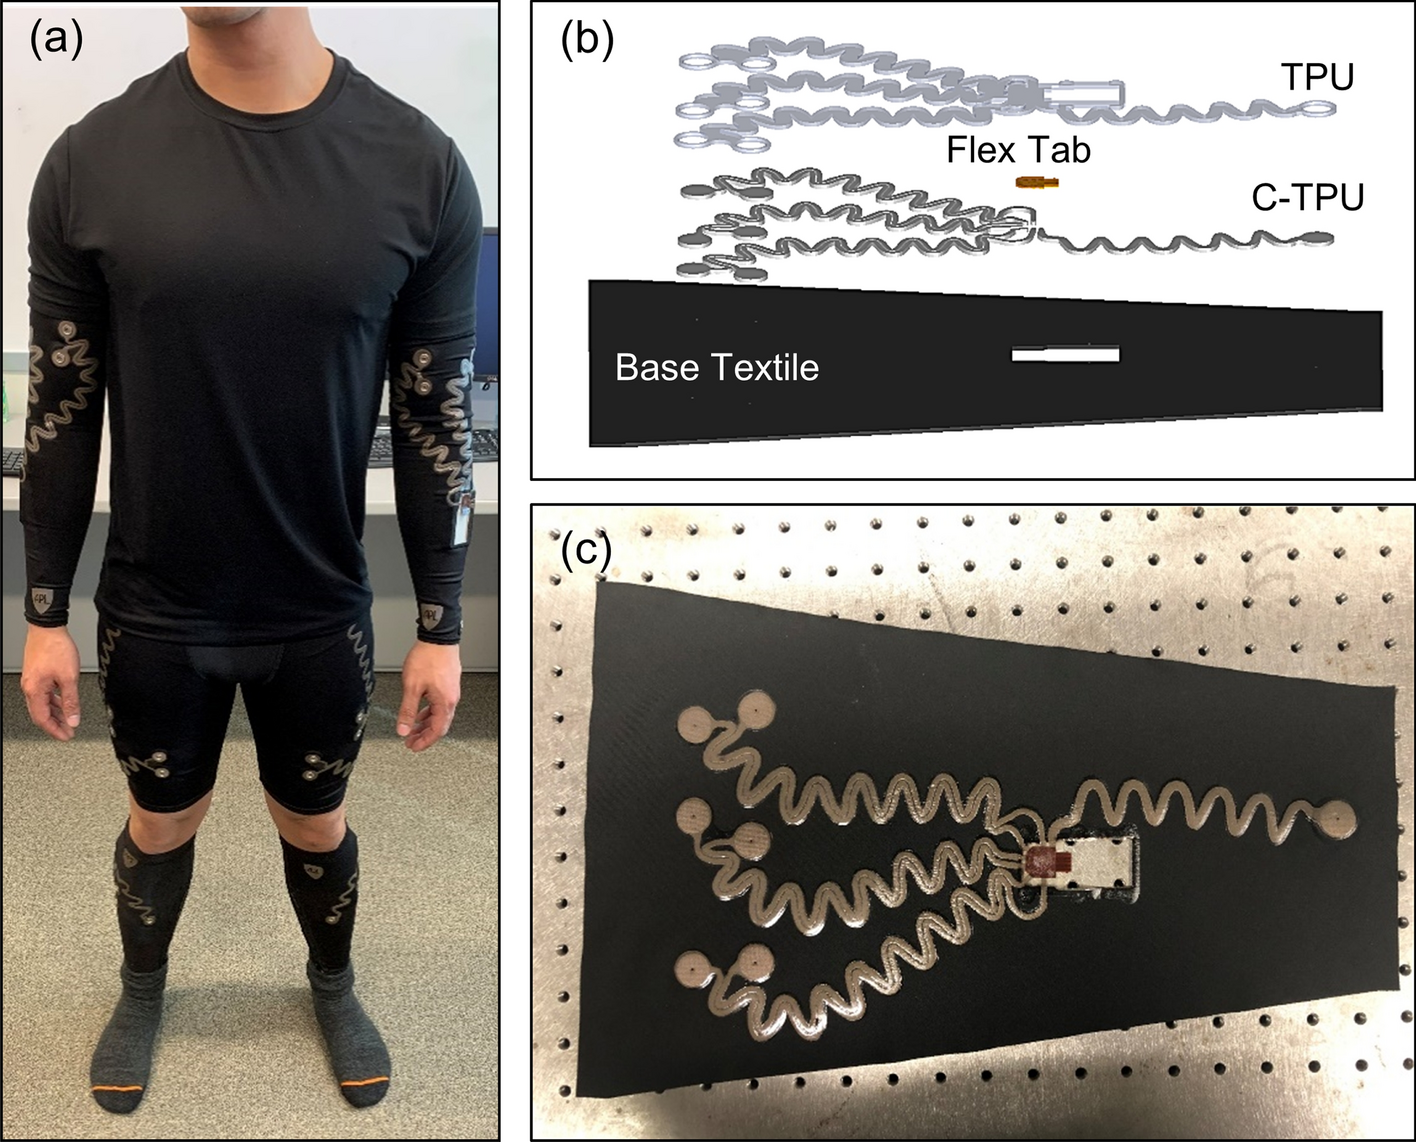 E-textile based modular sEMG suit for large area level of effort analysis |  Scientific Reports